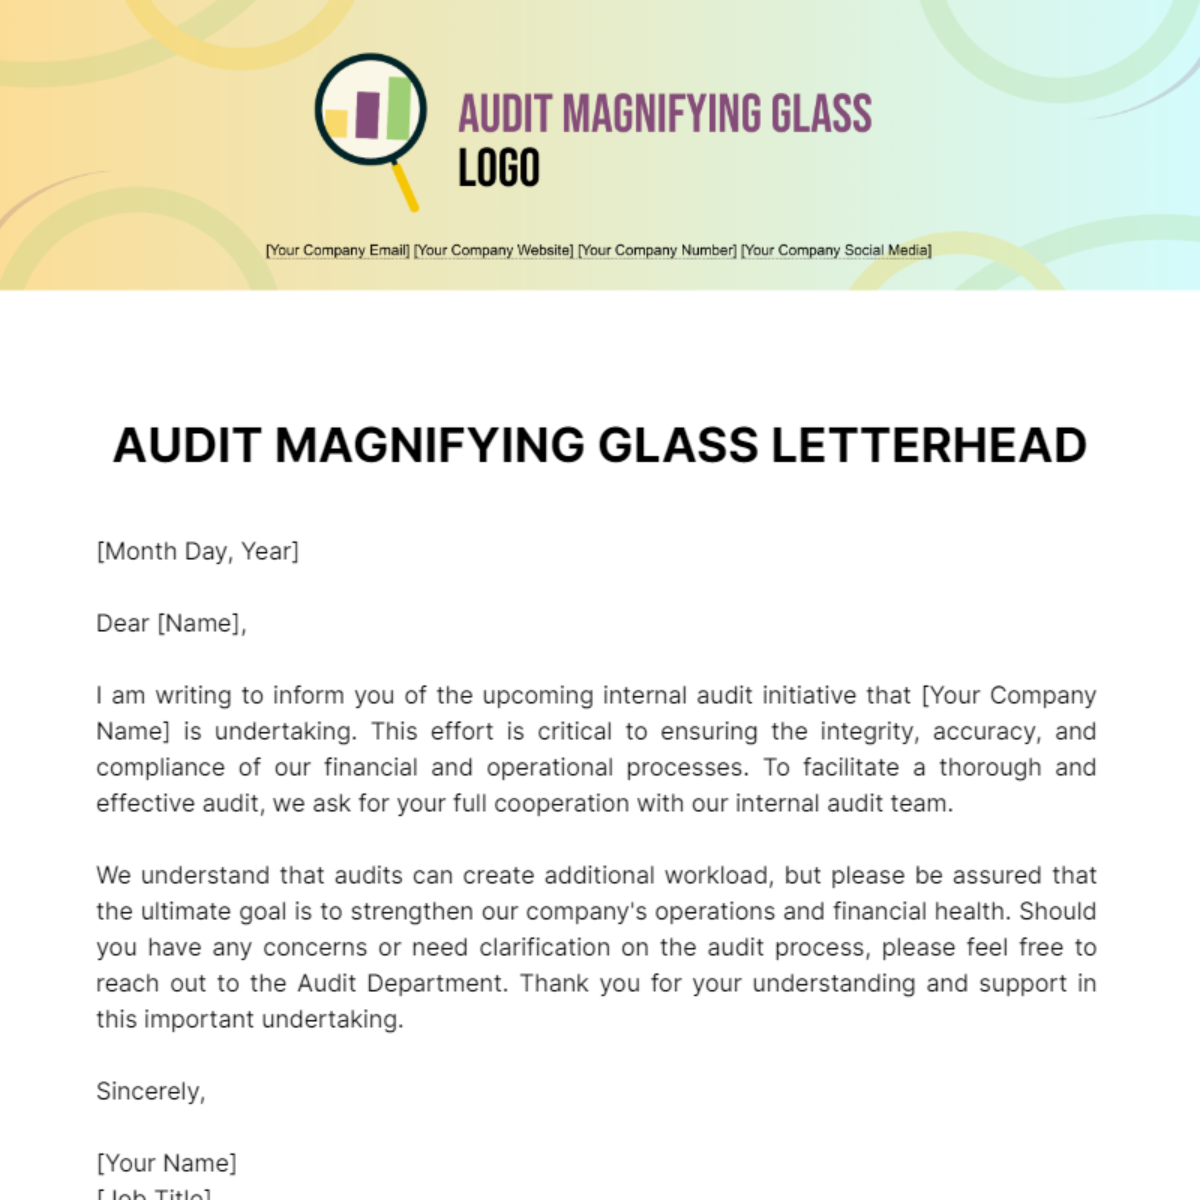 Free Audit Magnifying Glass Letterhead Template